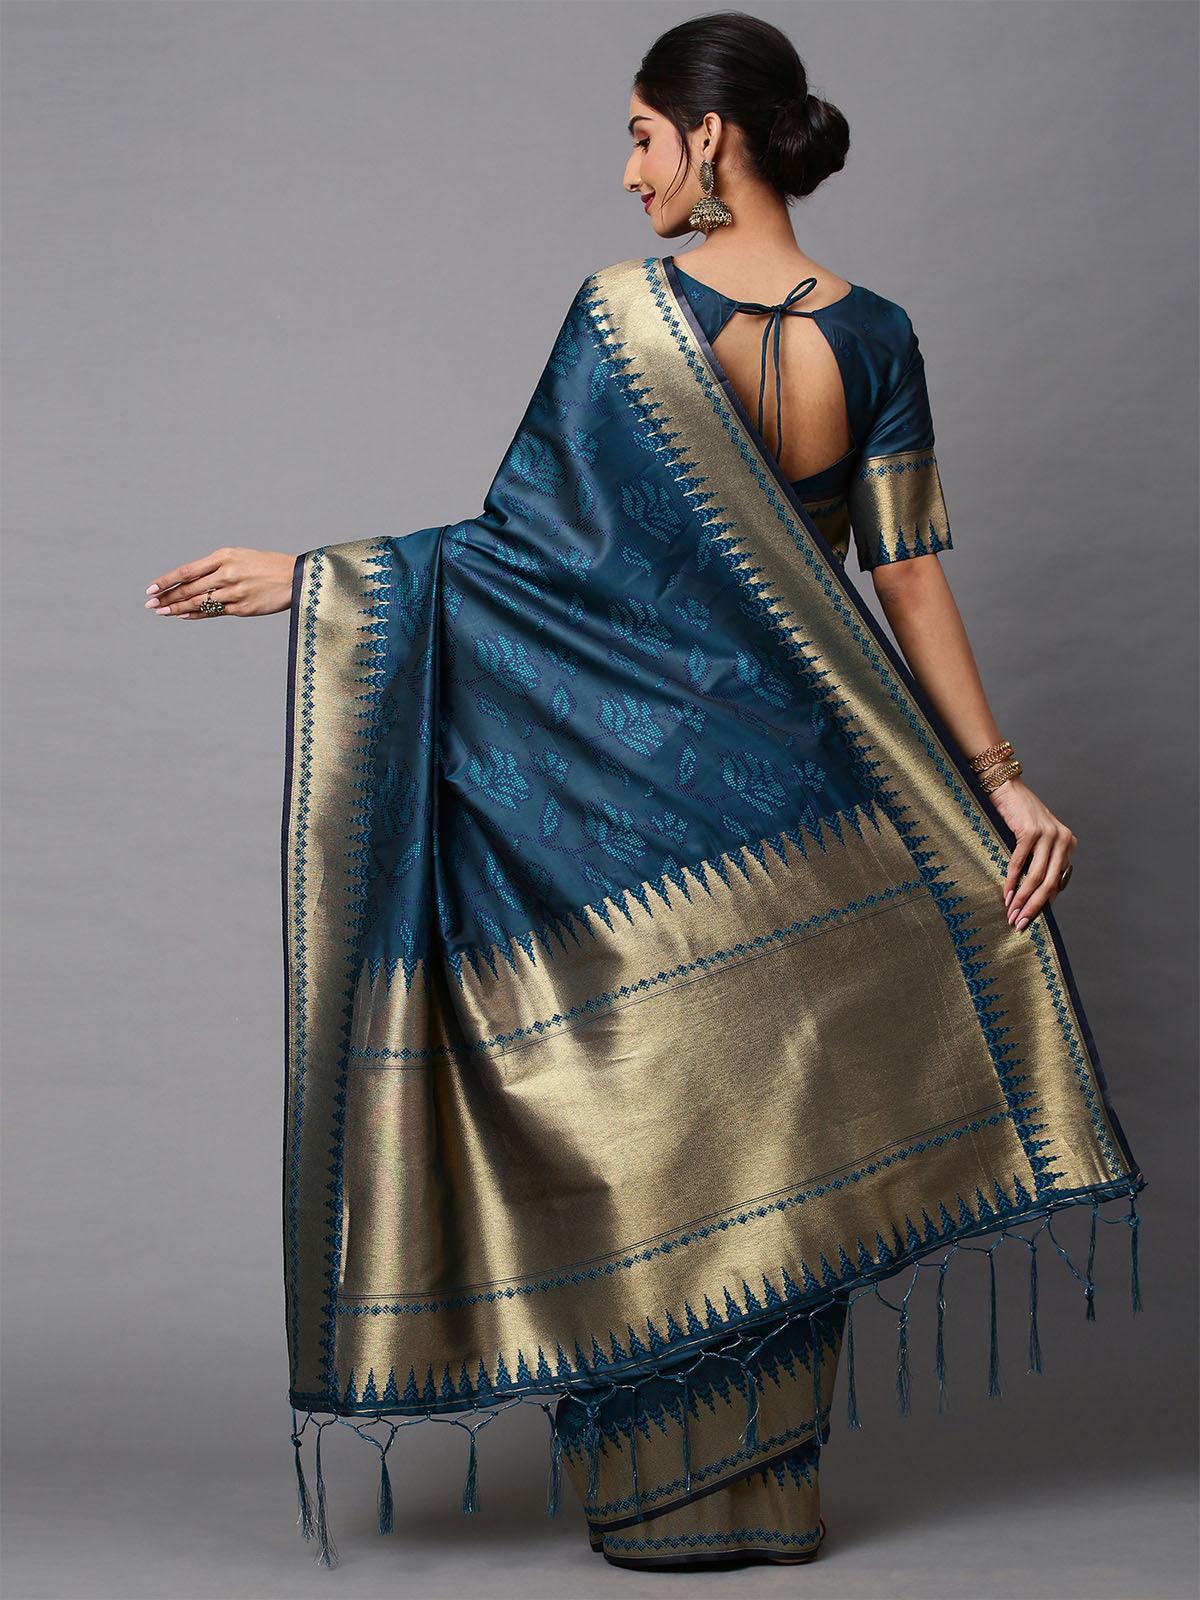 Women's Cotton Silk Teal blue Printed Celebrity Saree With Blouse Piece - Odette